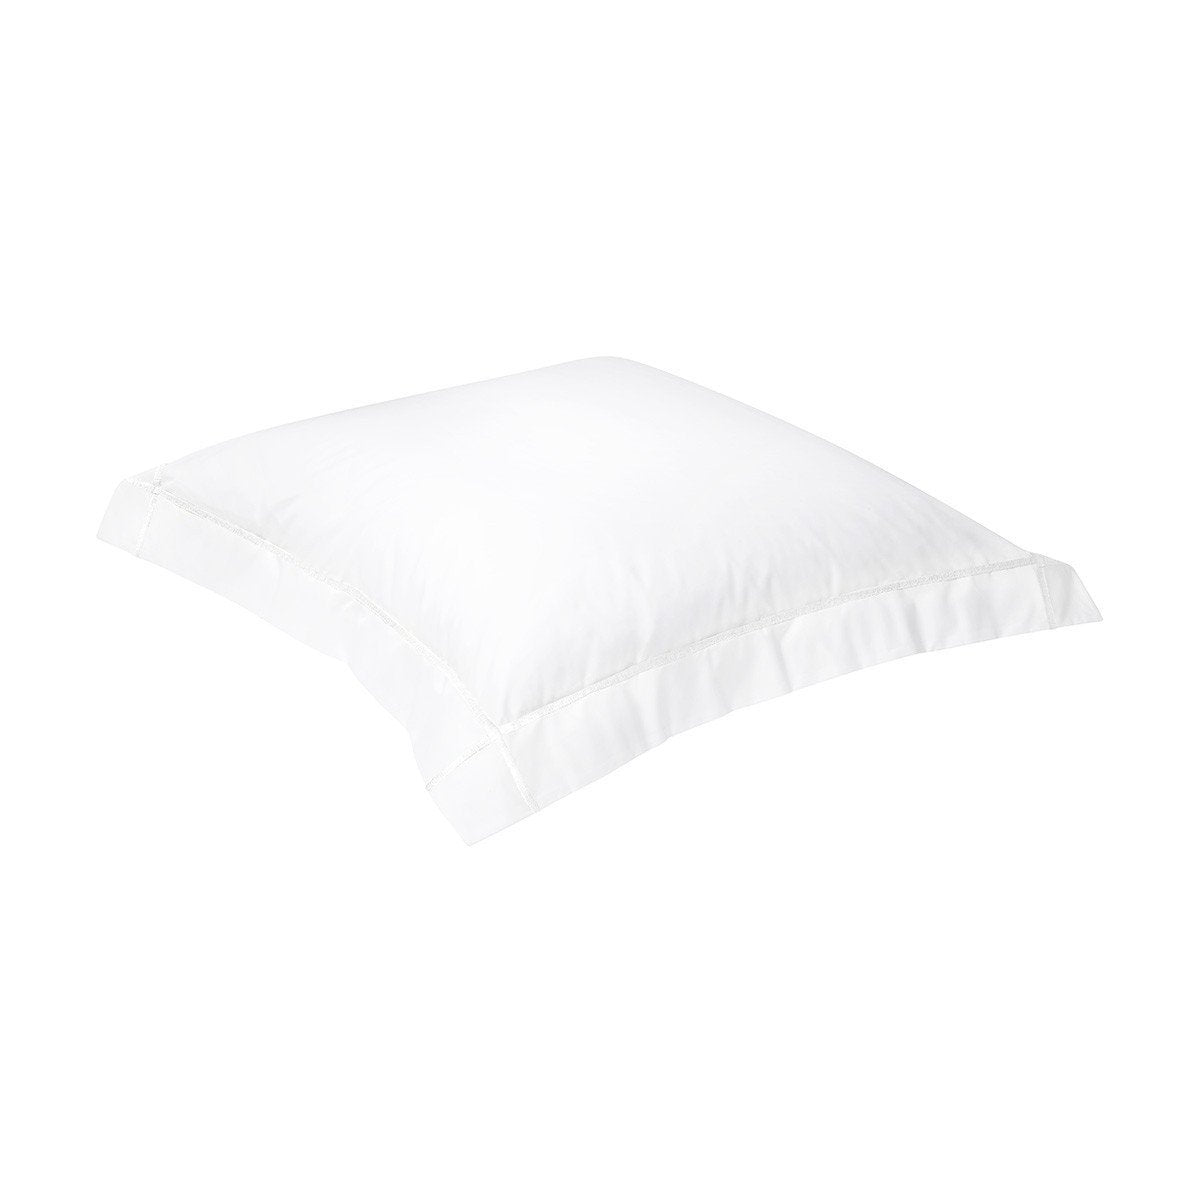 Athena Blanc Bedding Collection by Yves Delorme | Fig Linens - White euro sham